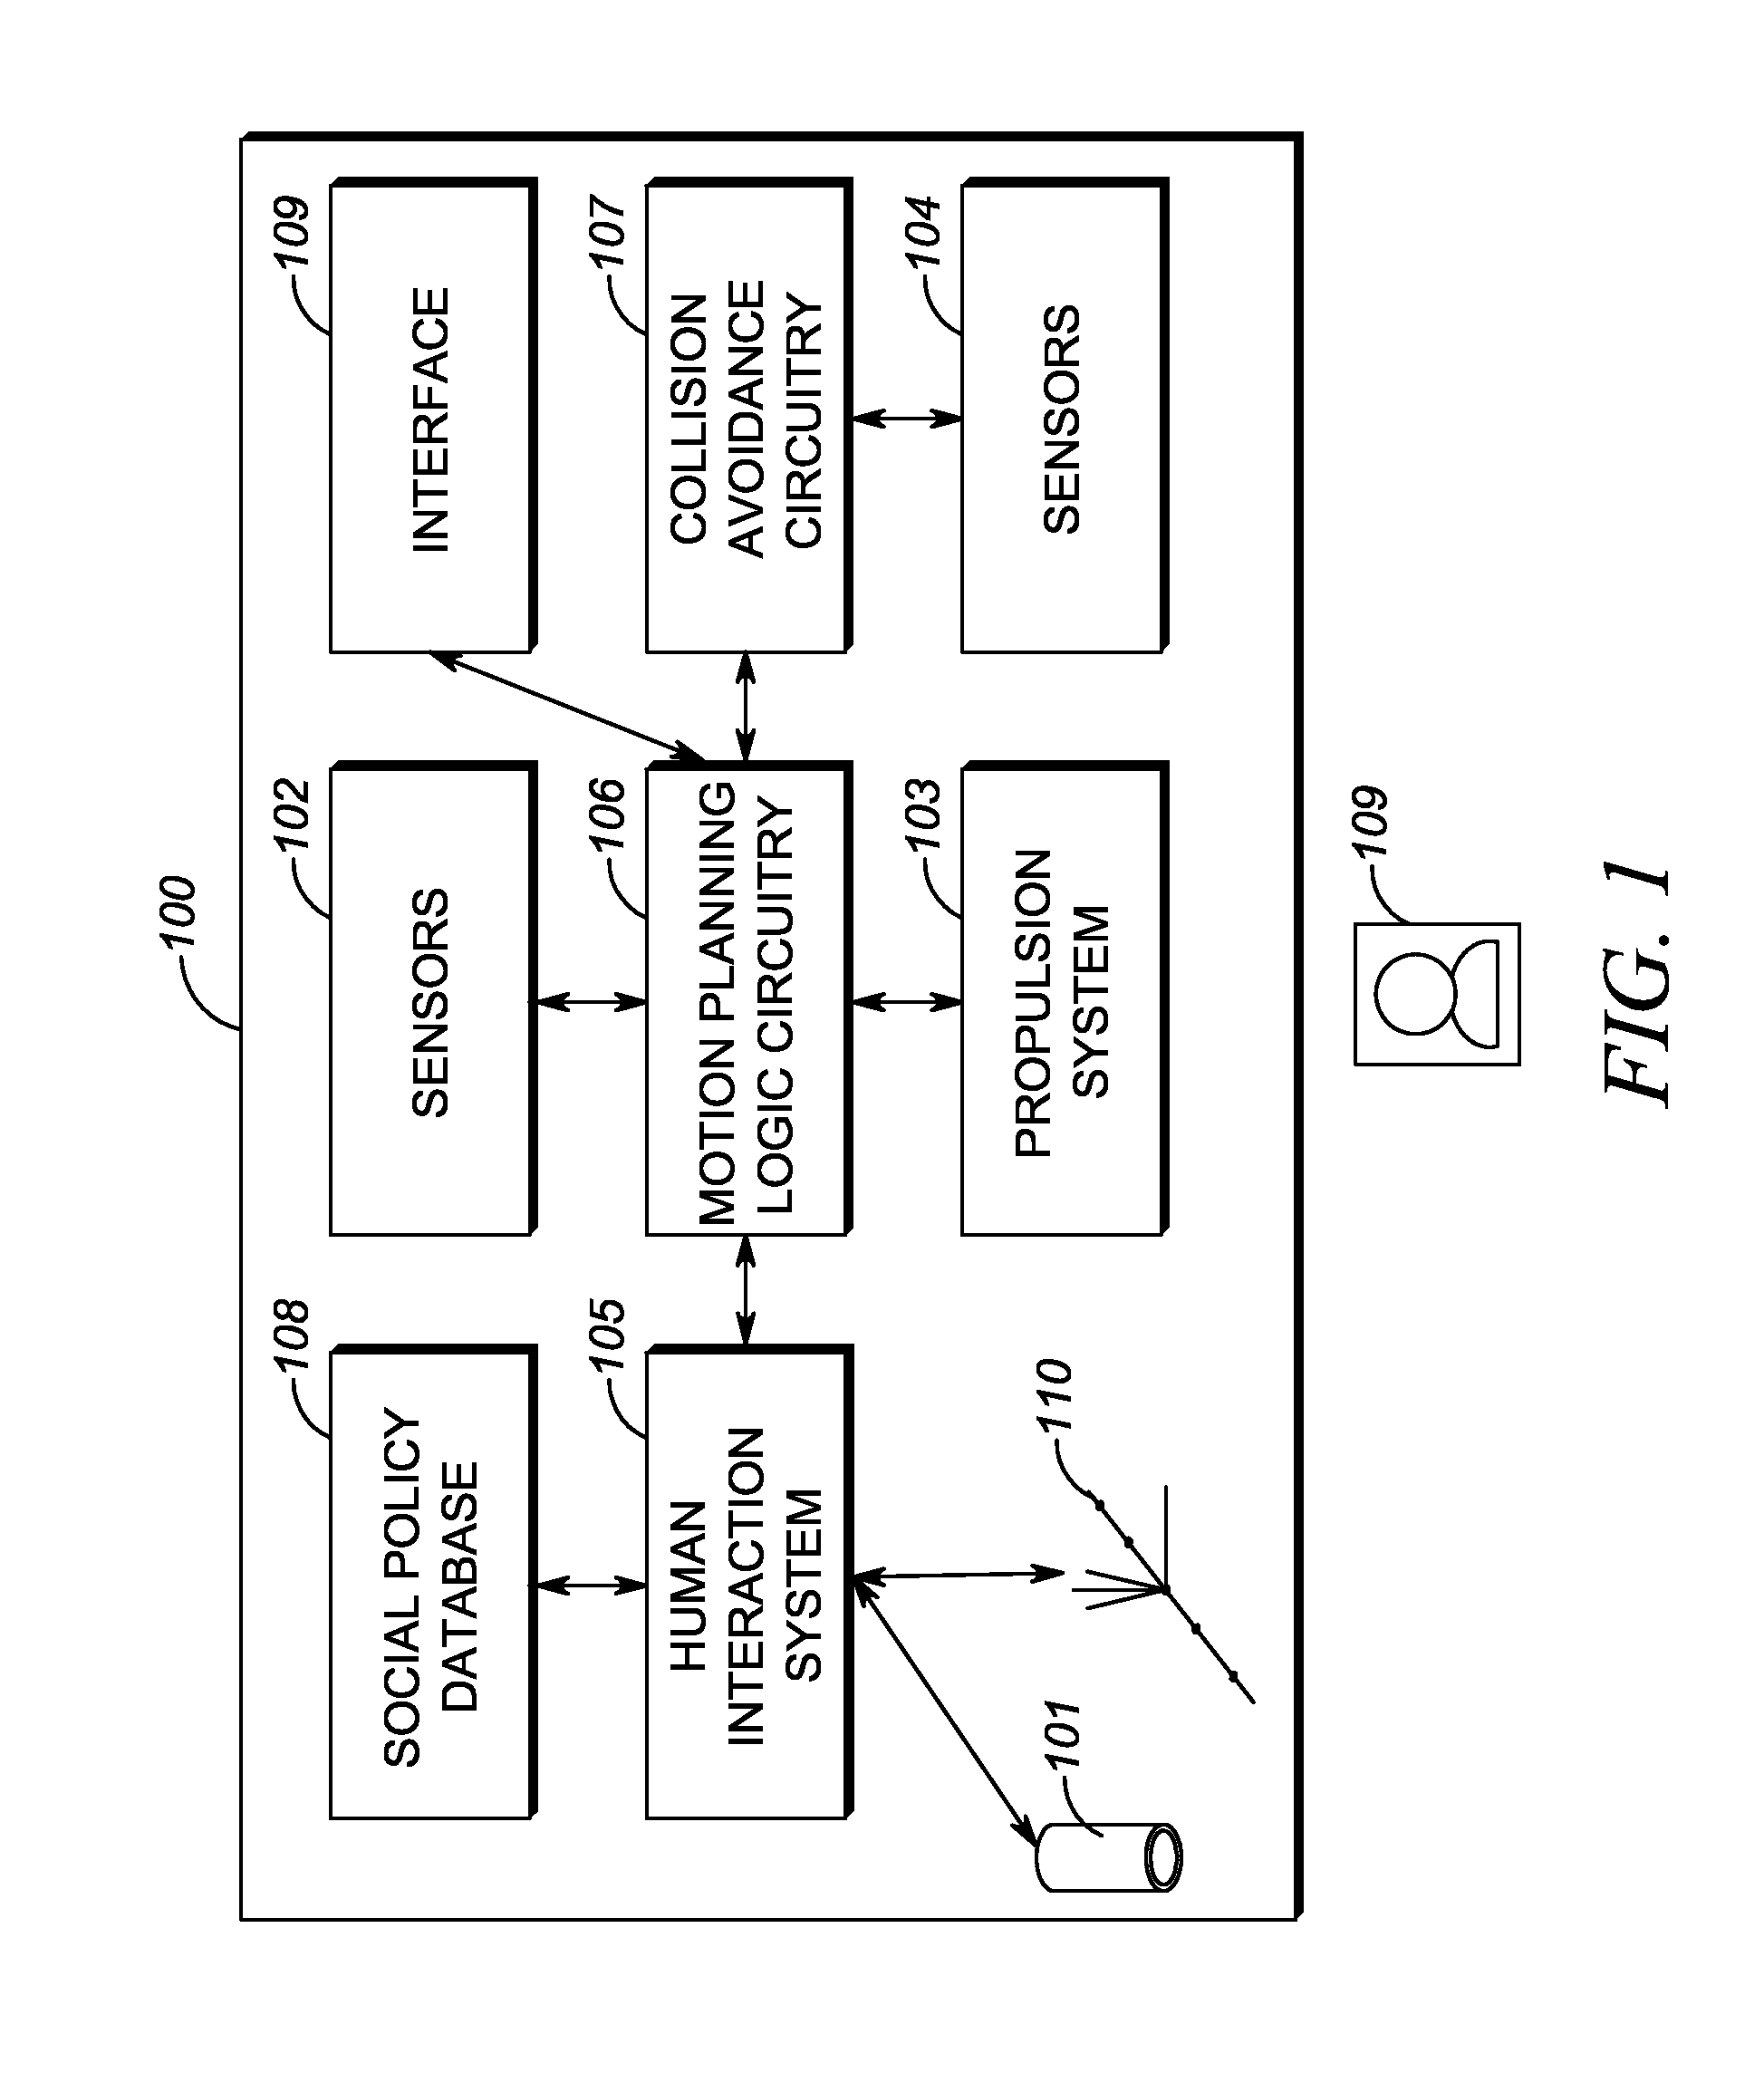 Method and apparatus for positioning an unmanned vehicle in proximity to a person or an object based jointly on placement policies and probability of successful placement